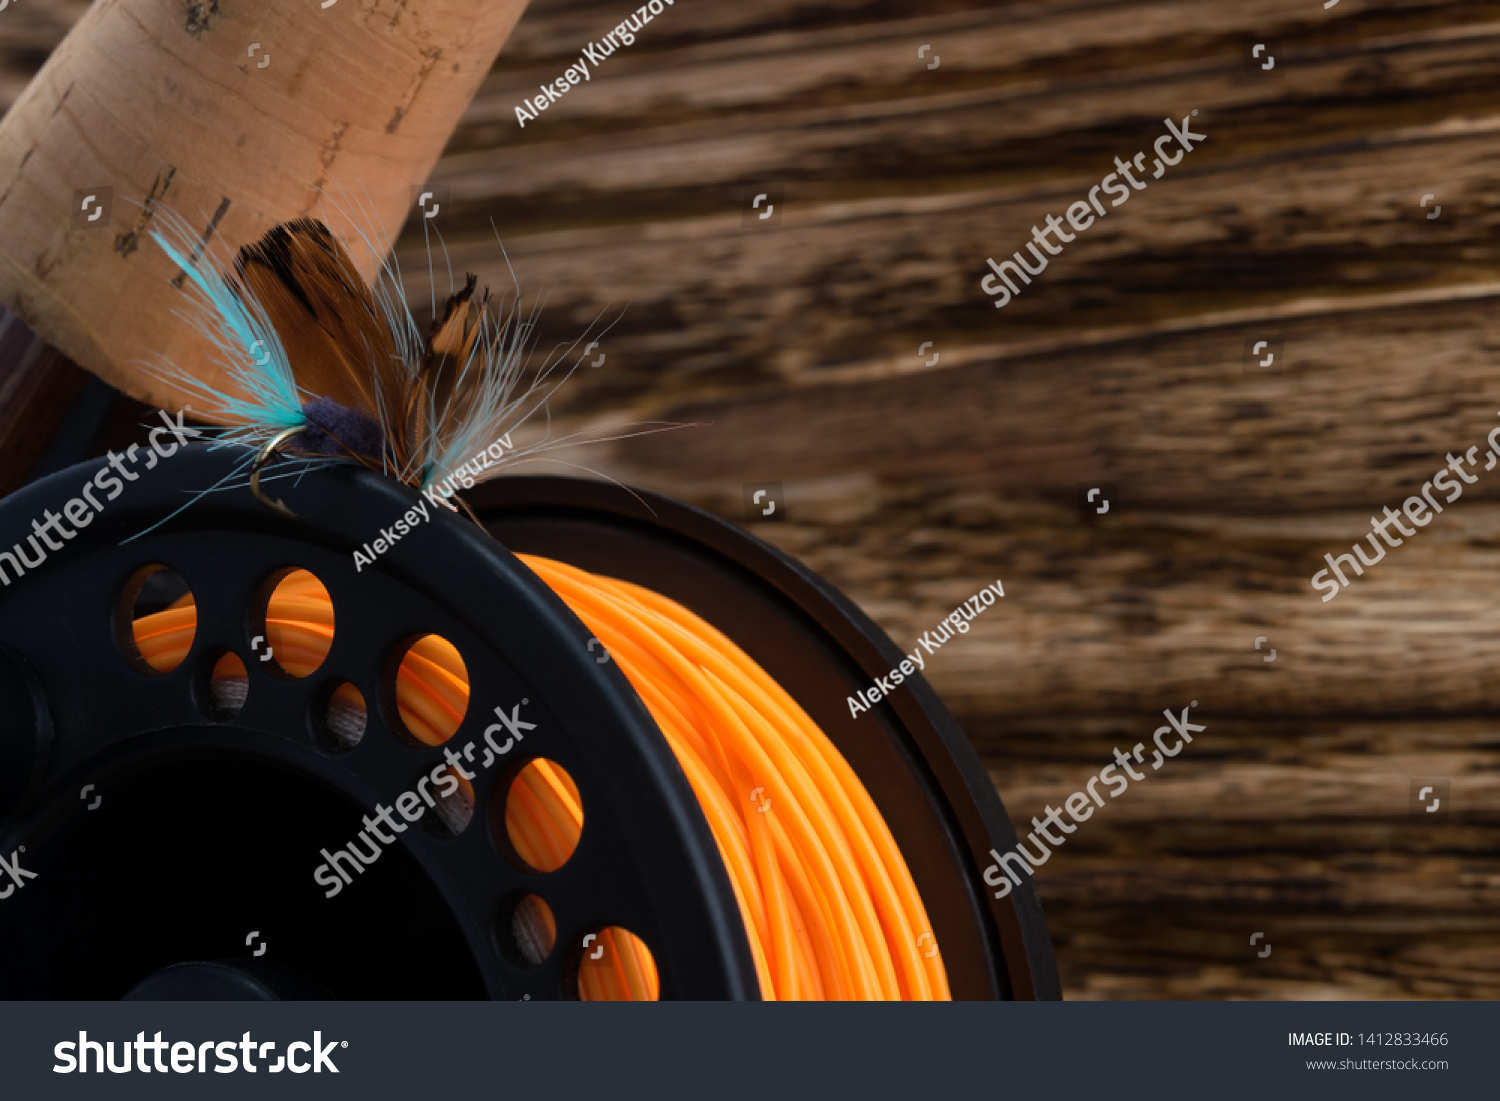 reel with orange fishing line and feather bait lie on a wooden background #1412833466